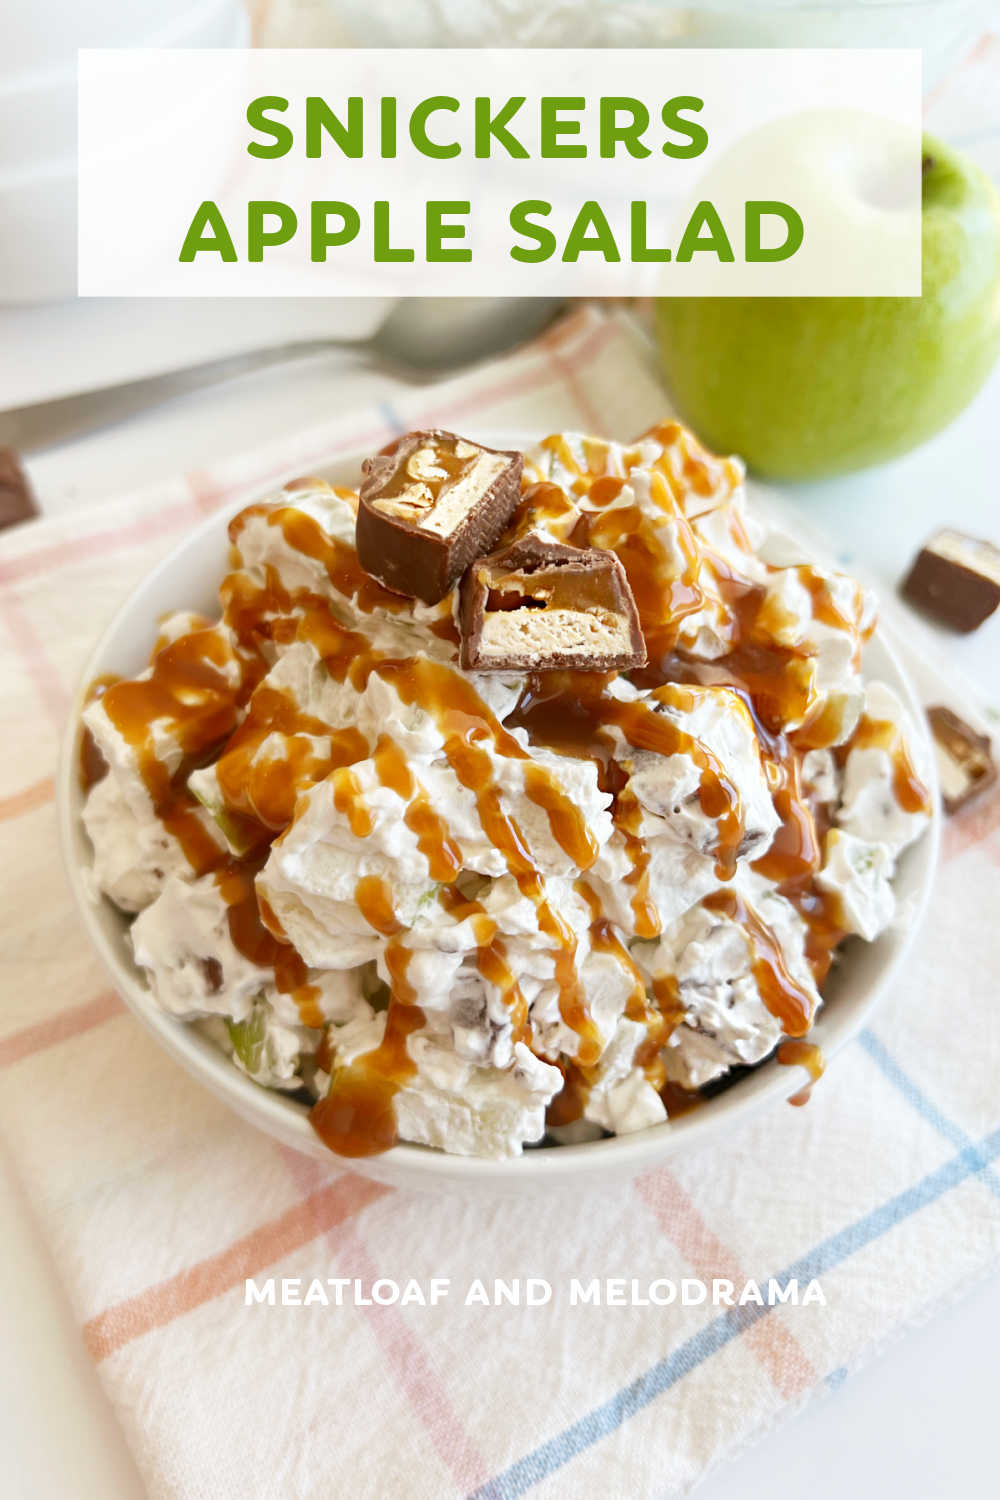 Snickers Apple Salad is an easy recipe for dessert salad made with tart apples, Cool Whip and Snickers candy bars. Only 3 ingredients in this simple side dish and perfect for holidays, family gatherings and potluck dinners! via @meamel